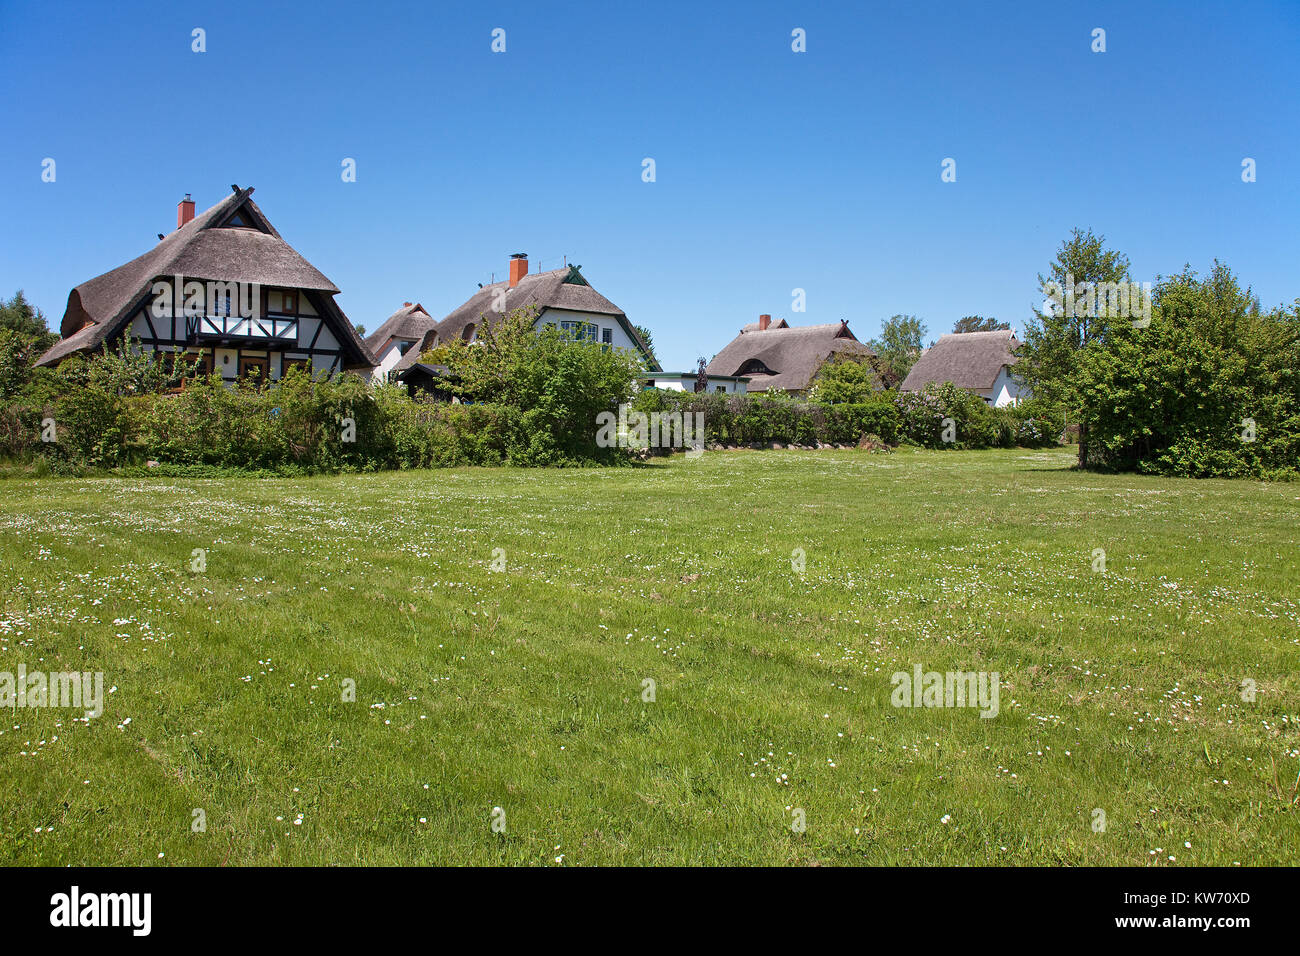 Thatched-roof houses at the village Ahrenshoop, Fishland, Mecklenburg-Western Pomerania, Baltic Sea, Germany, Europe Stock Photo